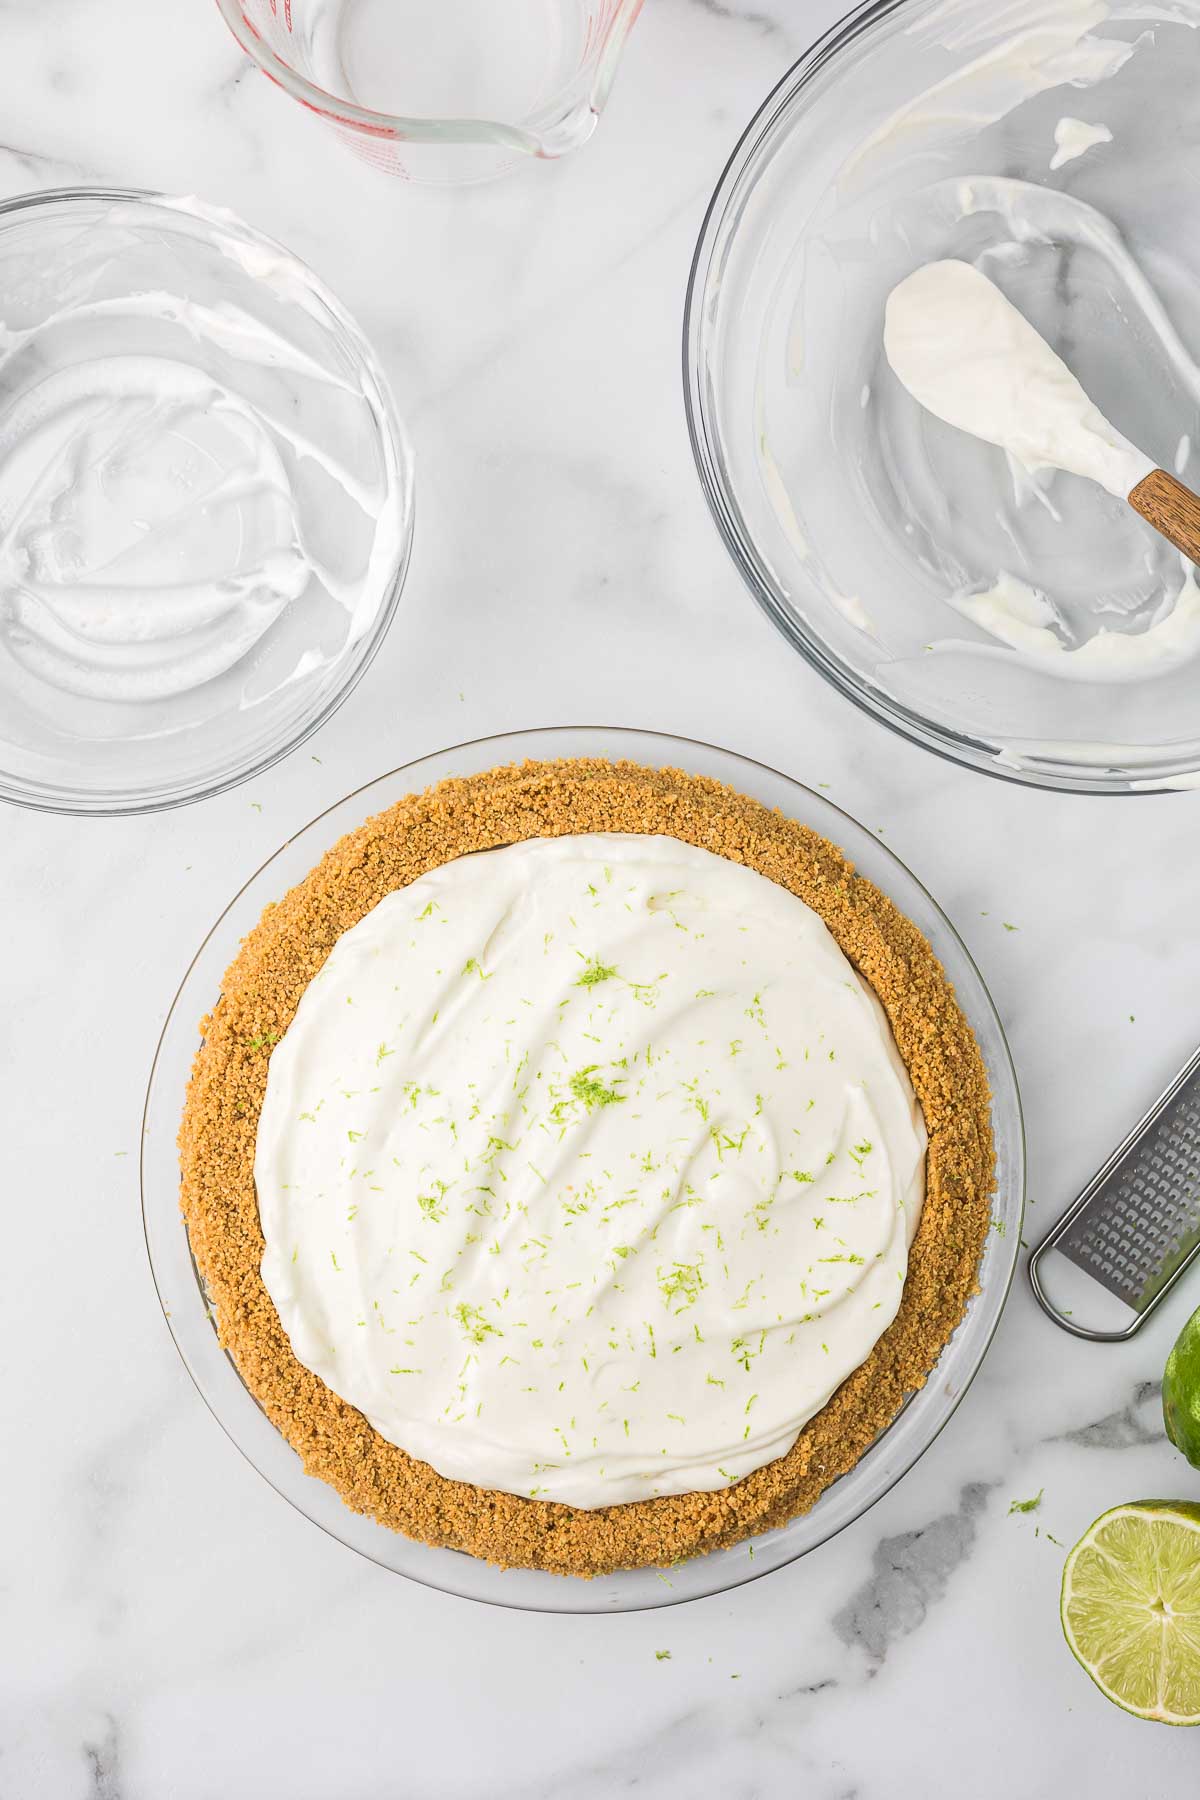 Key lime pie in a homemade graham cracker crust with lime zest.